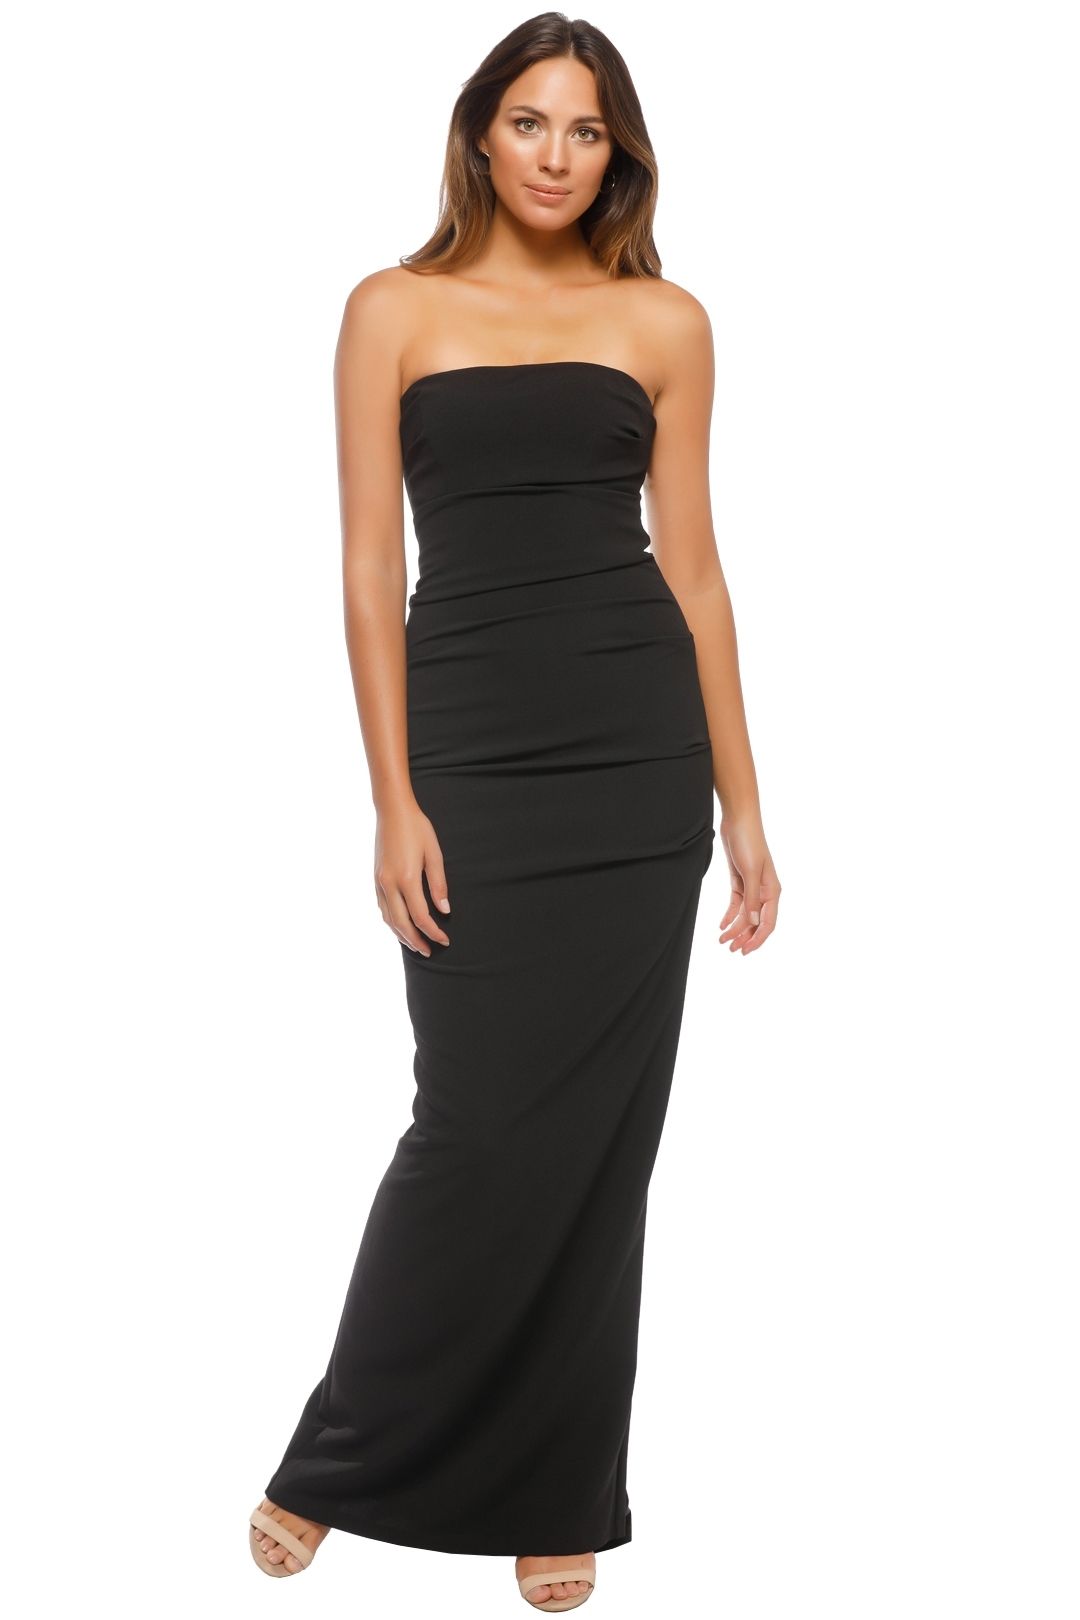 Nicole Miller Tick Strapless Gown - Black - Front